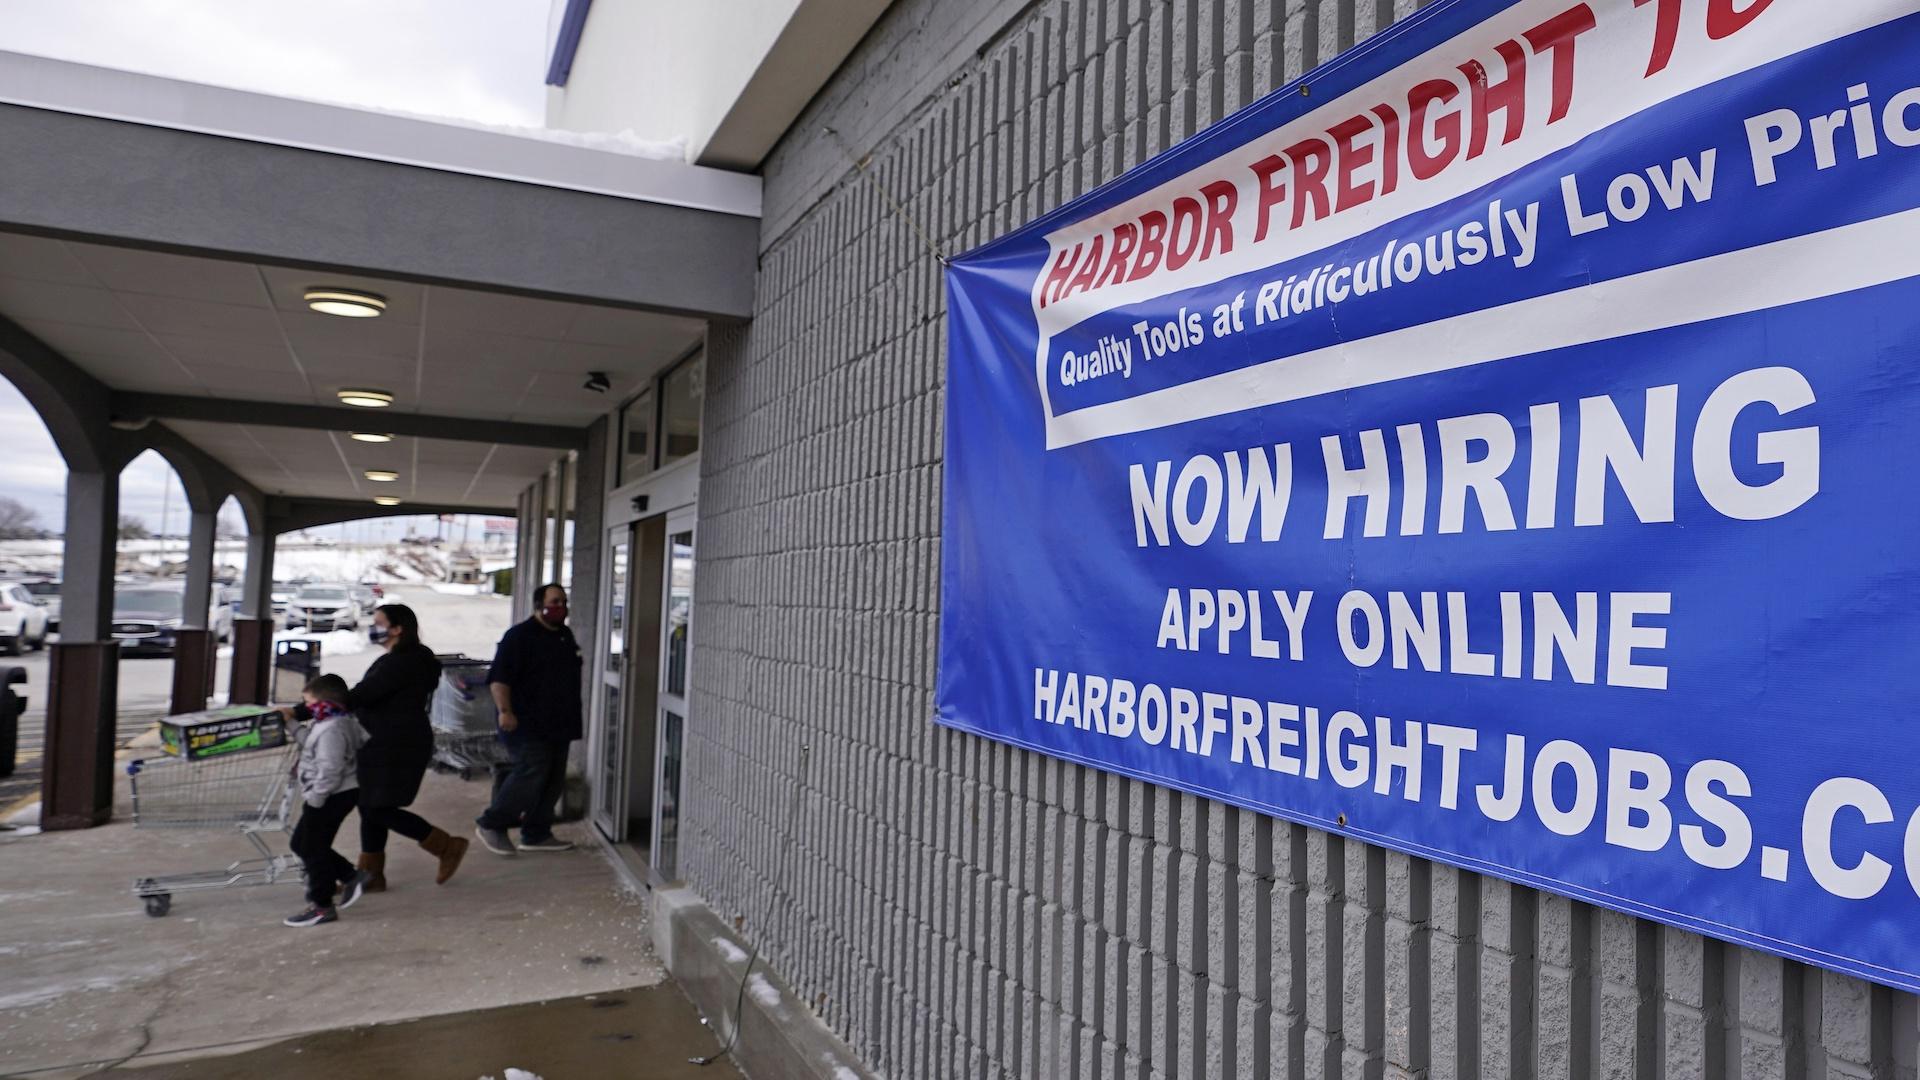 In this Dec. 10, 2020, file photo, a "Now Hiring" sign hangs on the front wall of a Harbor Freight Tools store in Manchester, N.H. The latest figures for jobless claims, issued Thursday, Jan. 14, 2021 by the Labor Department, remain at levels never seen until the virus struck. (AP Photo/Charles Krupa, File)